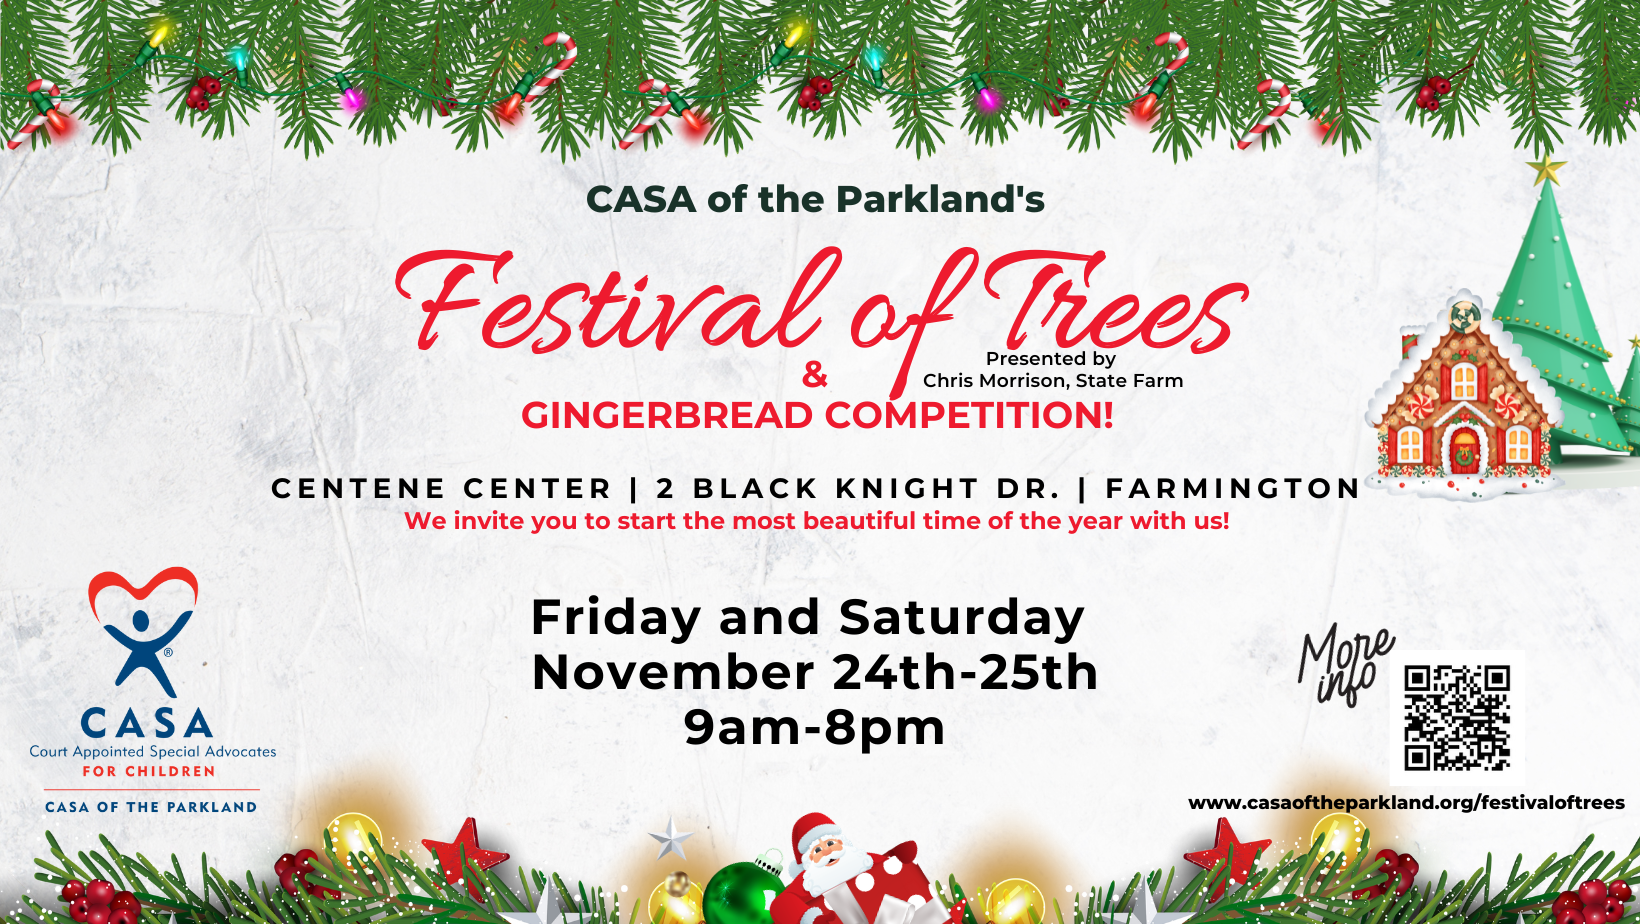 CASA's Festival of Trees This Week